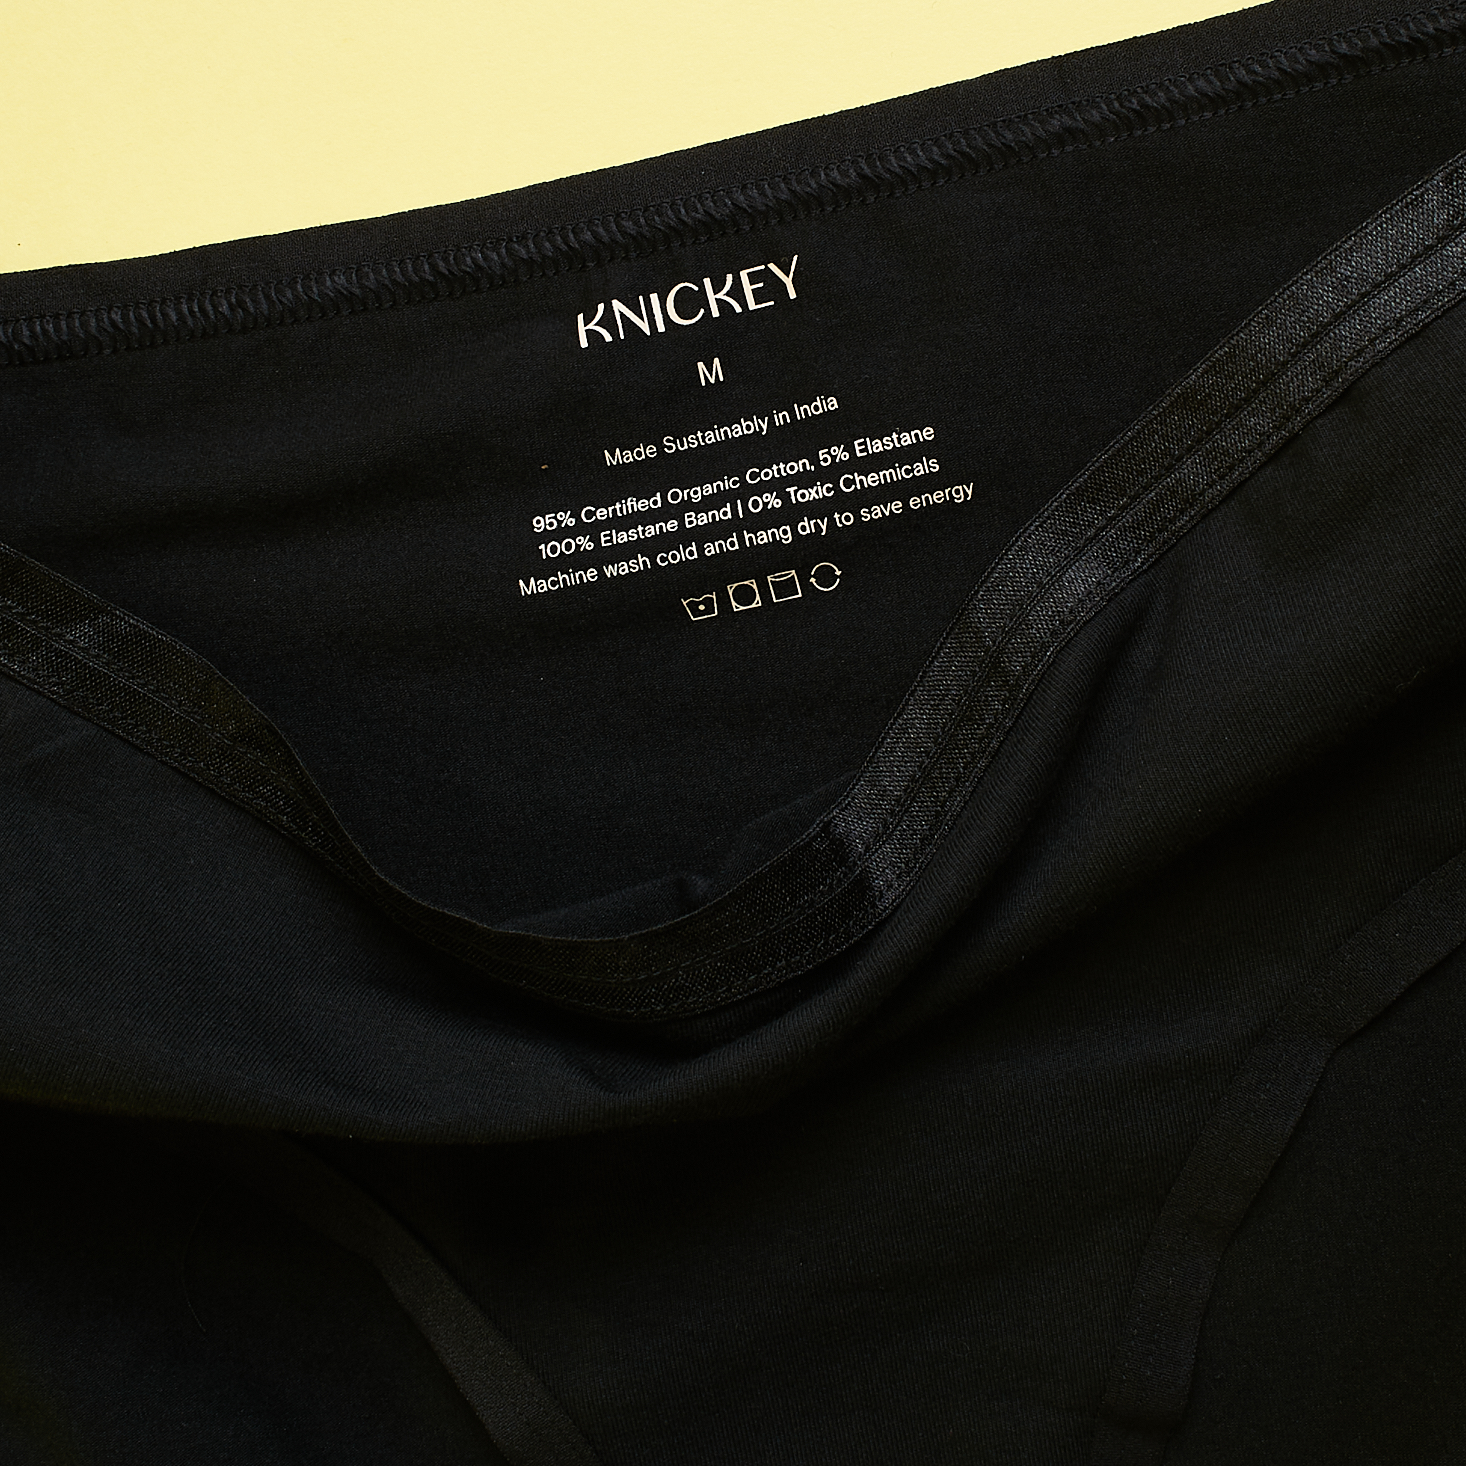 My Knickey Review — Organic Cotton Underwear With a Focus on Sustainability